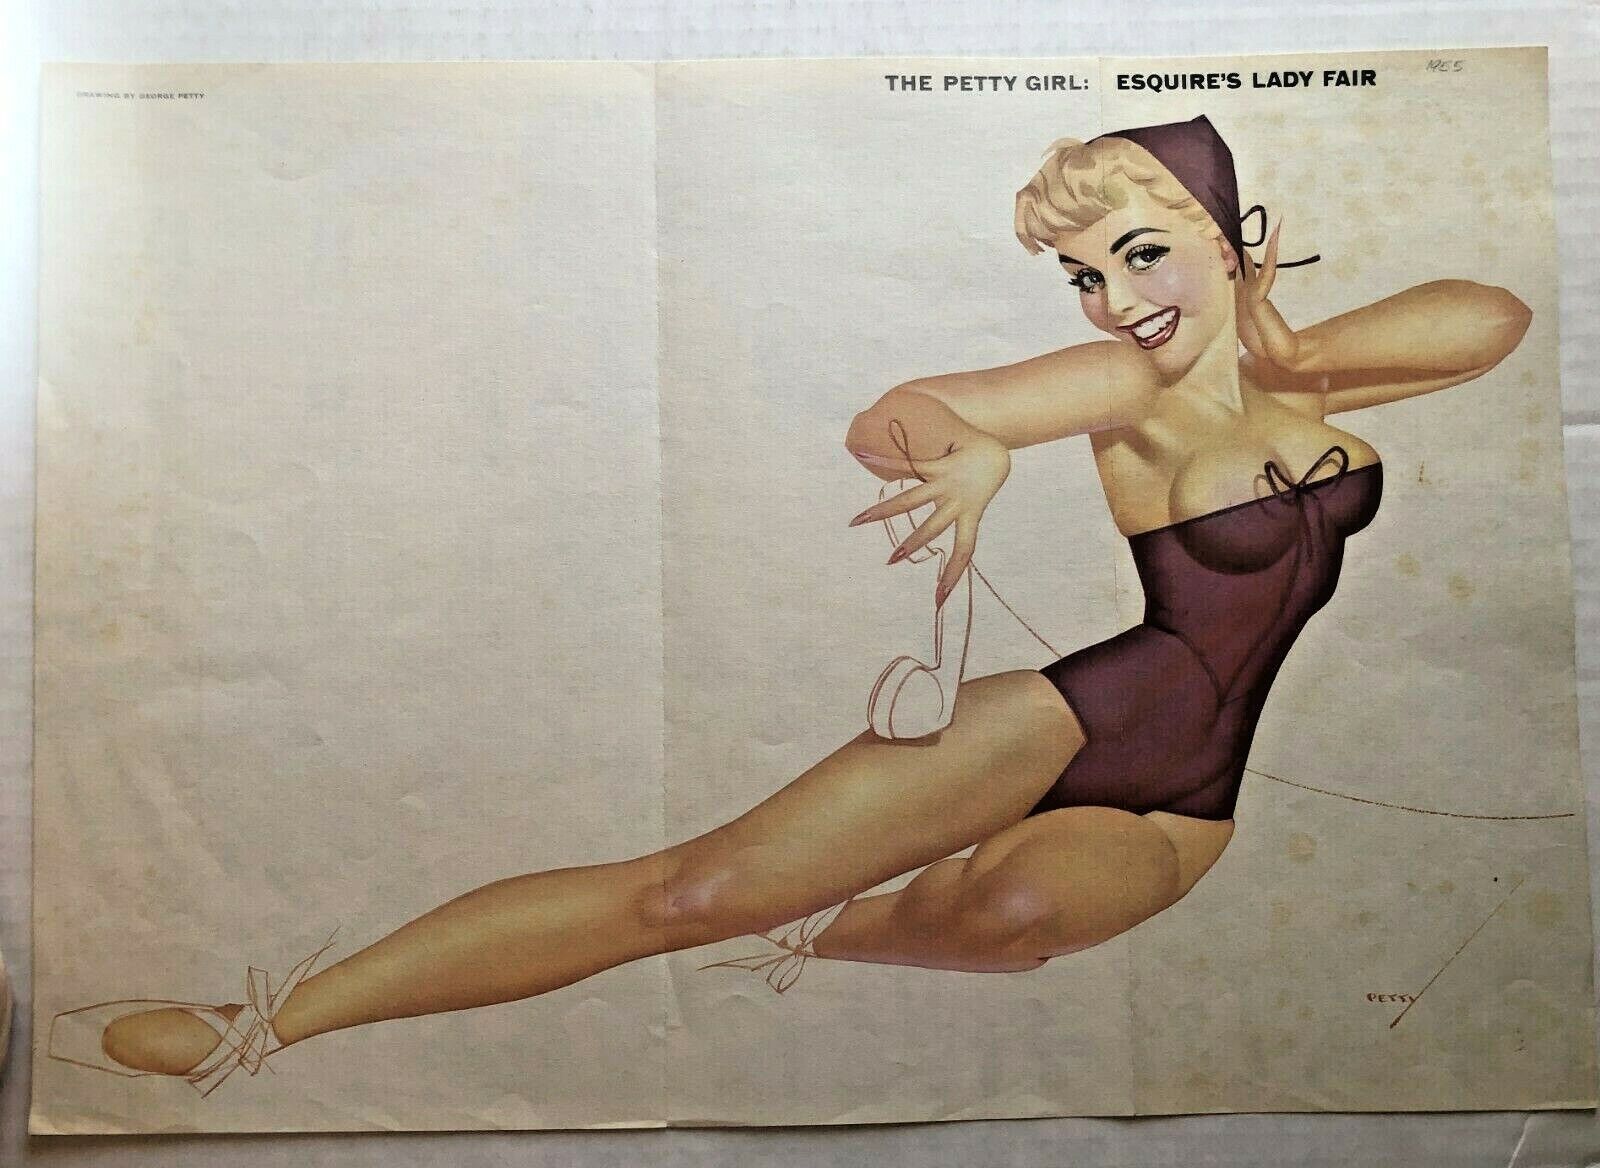 1955 Esquire Magazine Pinup Girl Centerfold by Petty - Esquire\'s Lady Fair